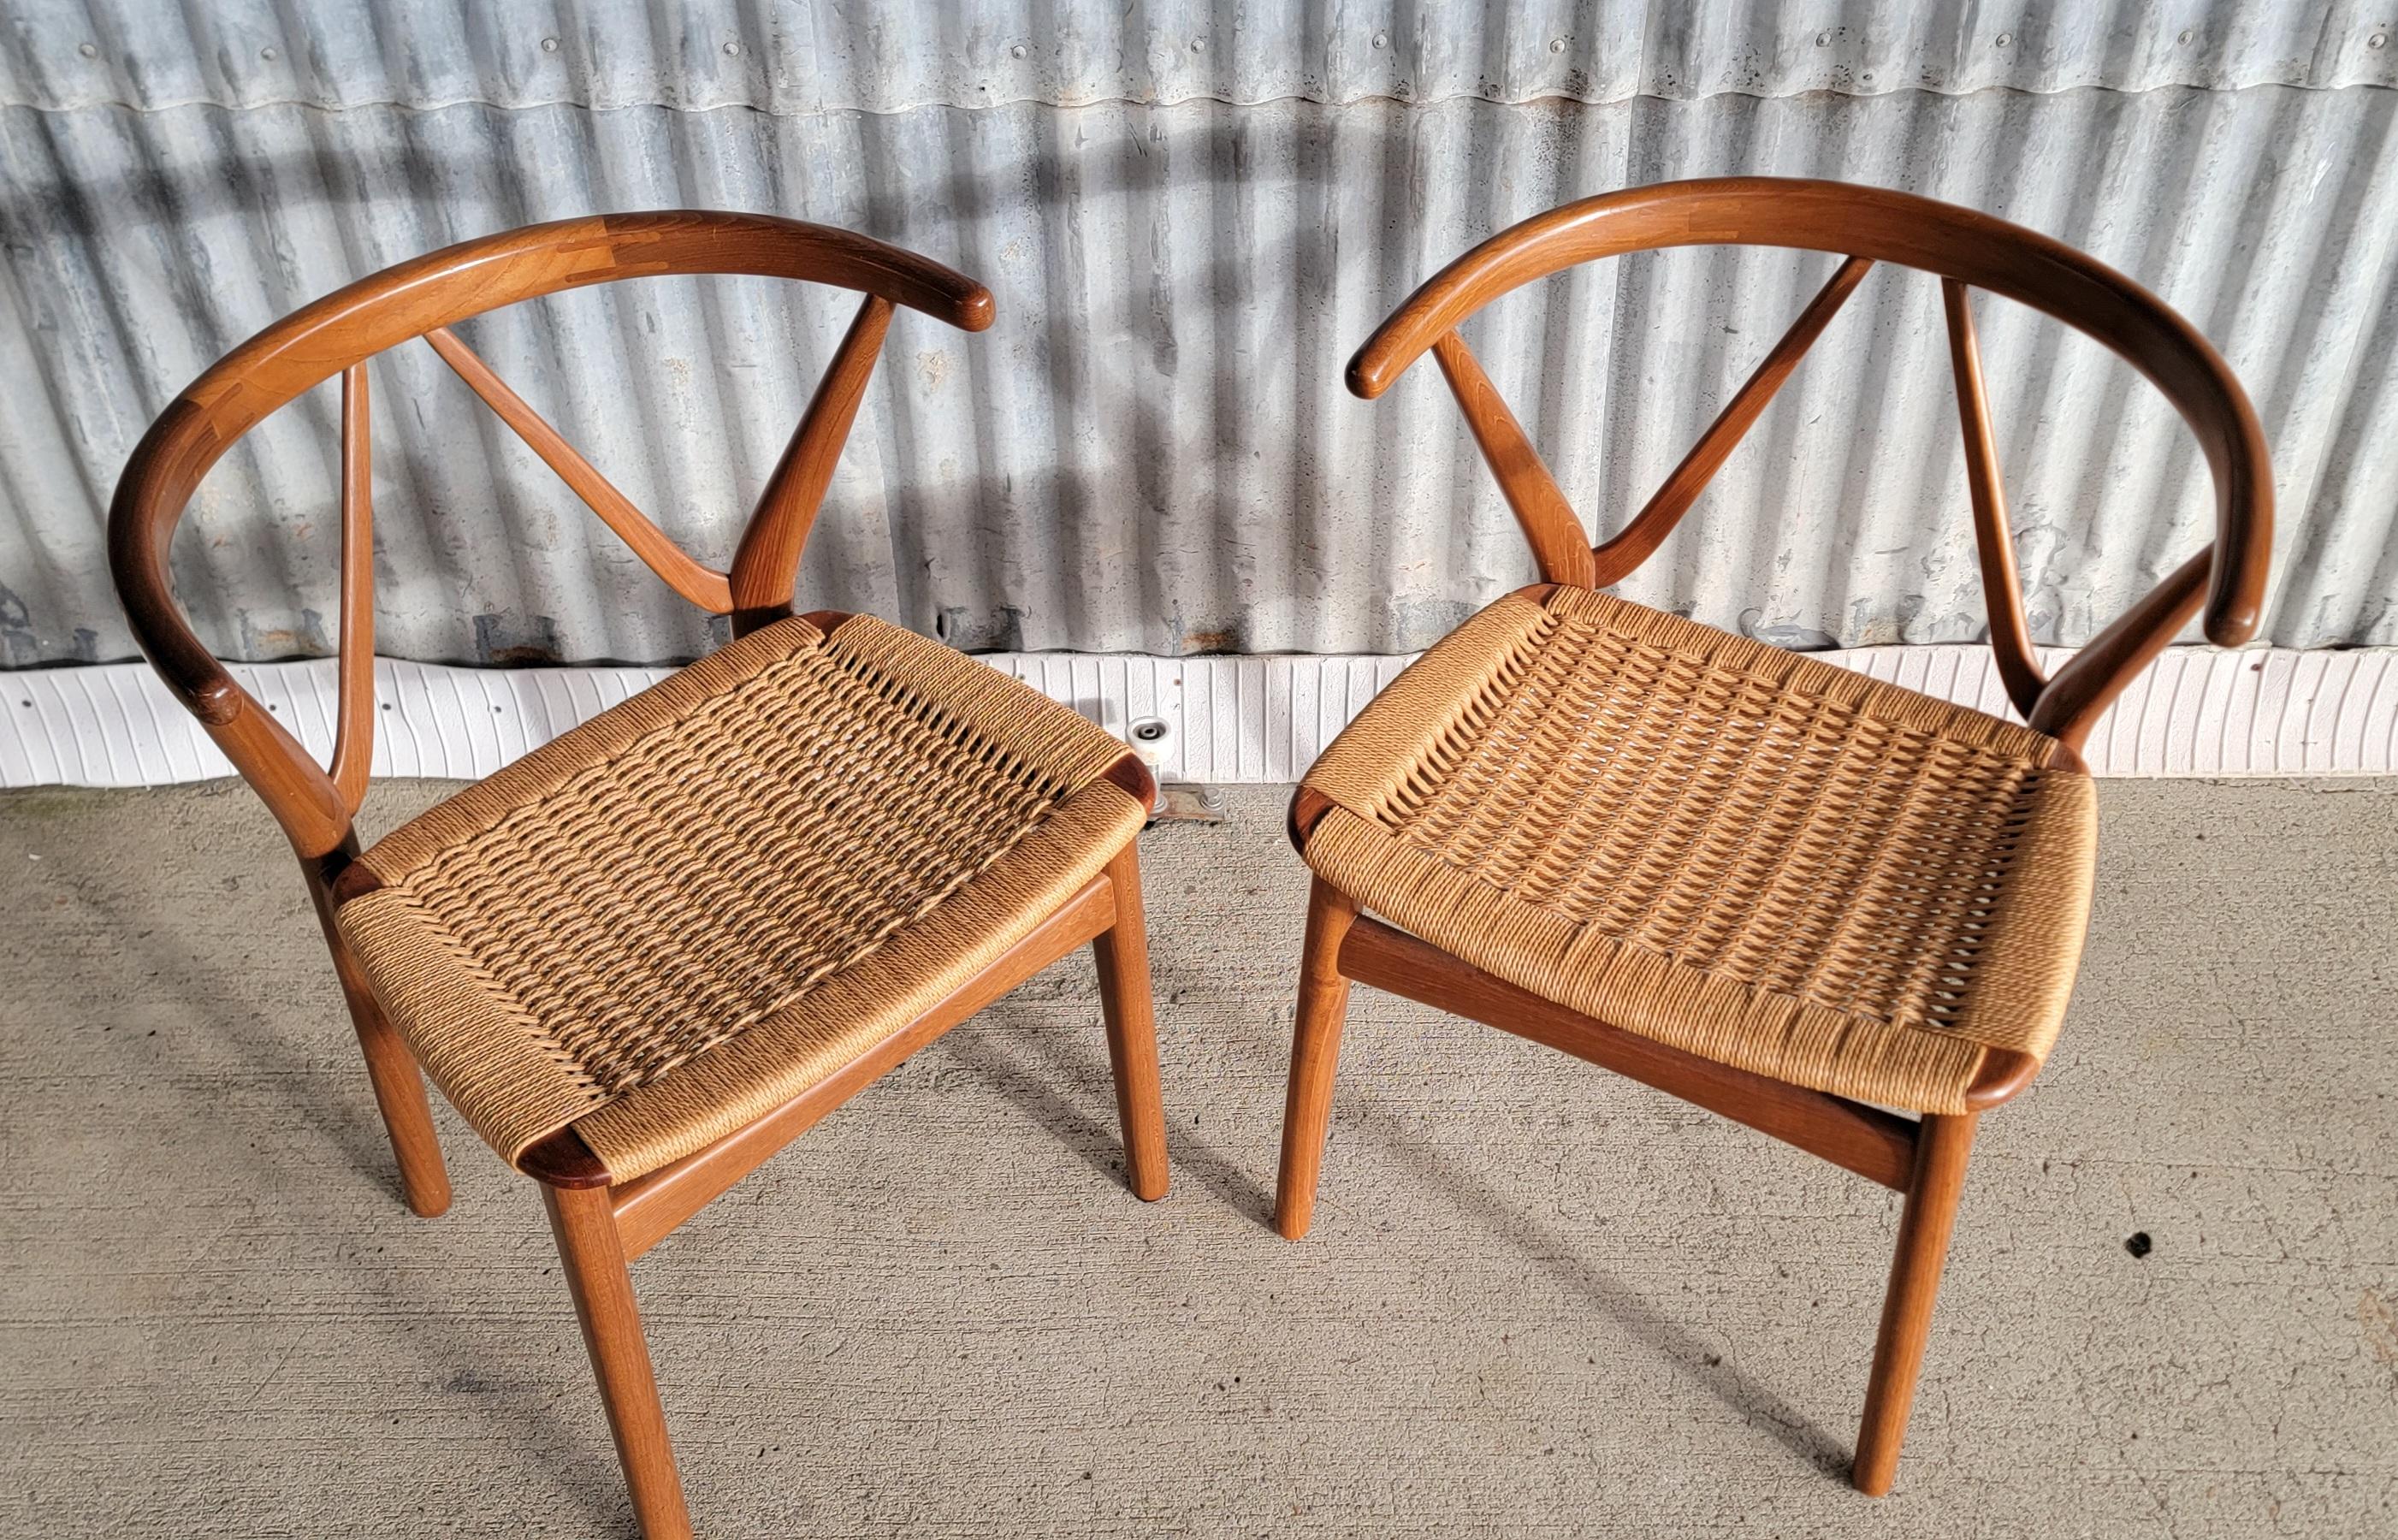 A pair of teak and paper cord dining armchairs designed by Henning Kjaernuff for Bruno Hansen. Denmark. Circa. 1960. Makers mark stamped on chair frame. Original paper cord seats are worn and have broken cords. Replacement recommended soon or add